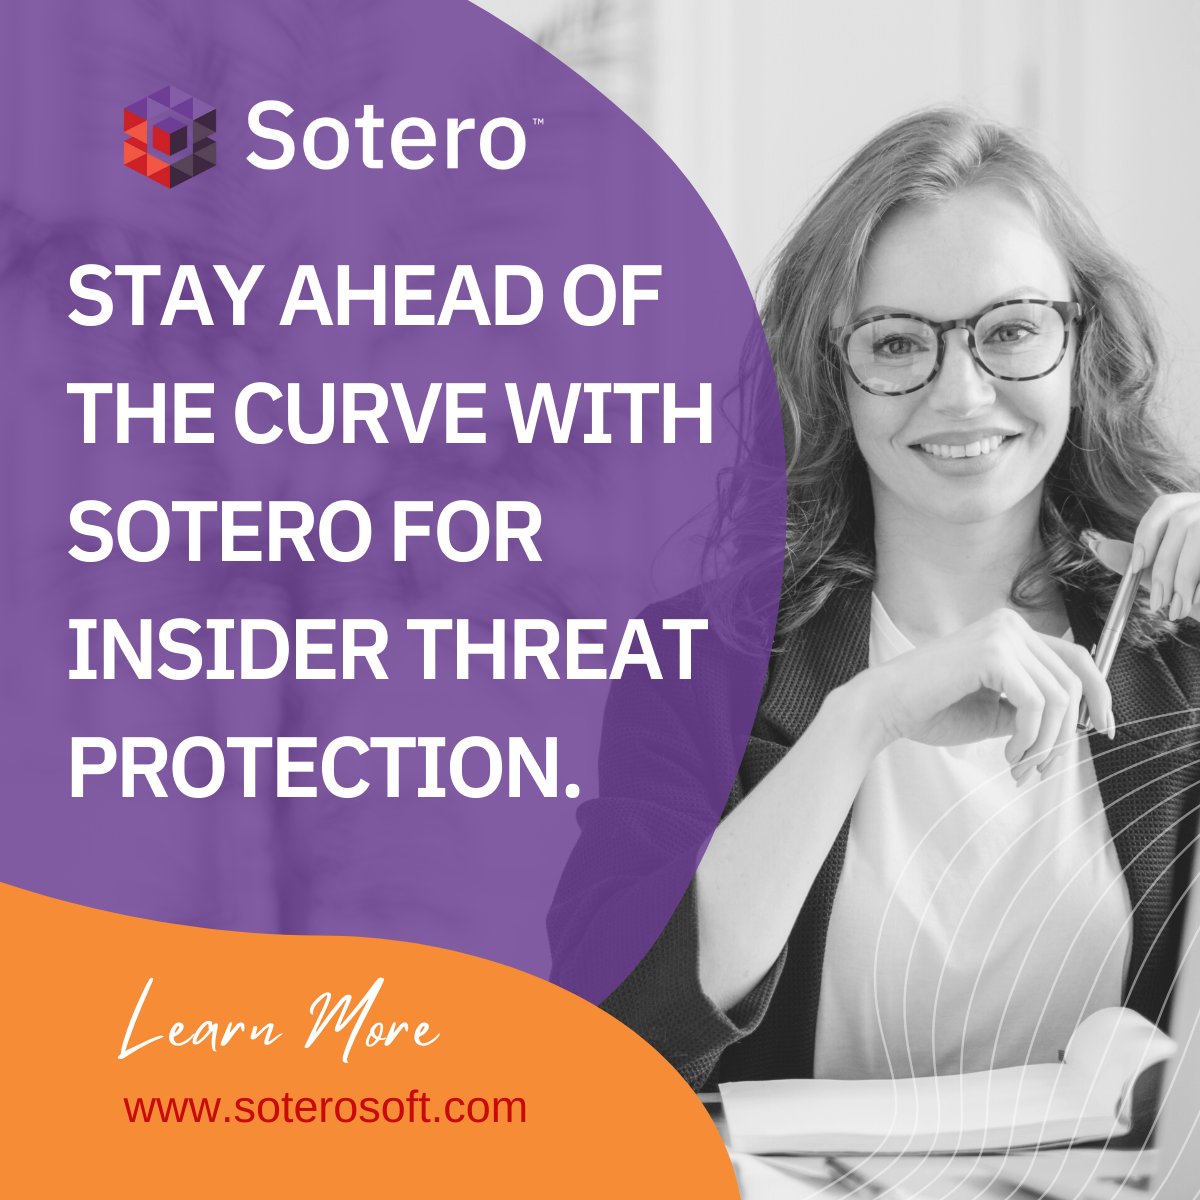 Don't overlook insider threat risk. Insider threats can also impact the safety of employees. For example, insiders with malicious intent may use sensitive information to harm others within the organization. Stay ahead of the curve with Sotero for insider threat protection.